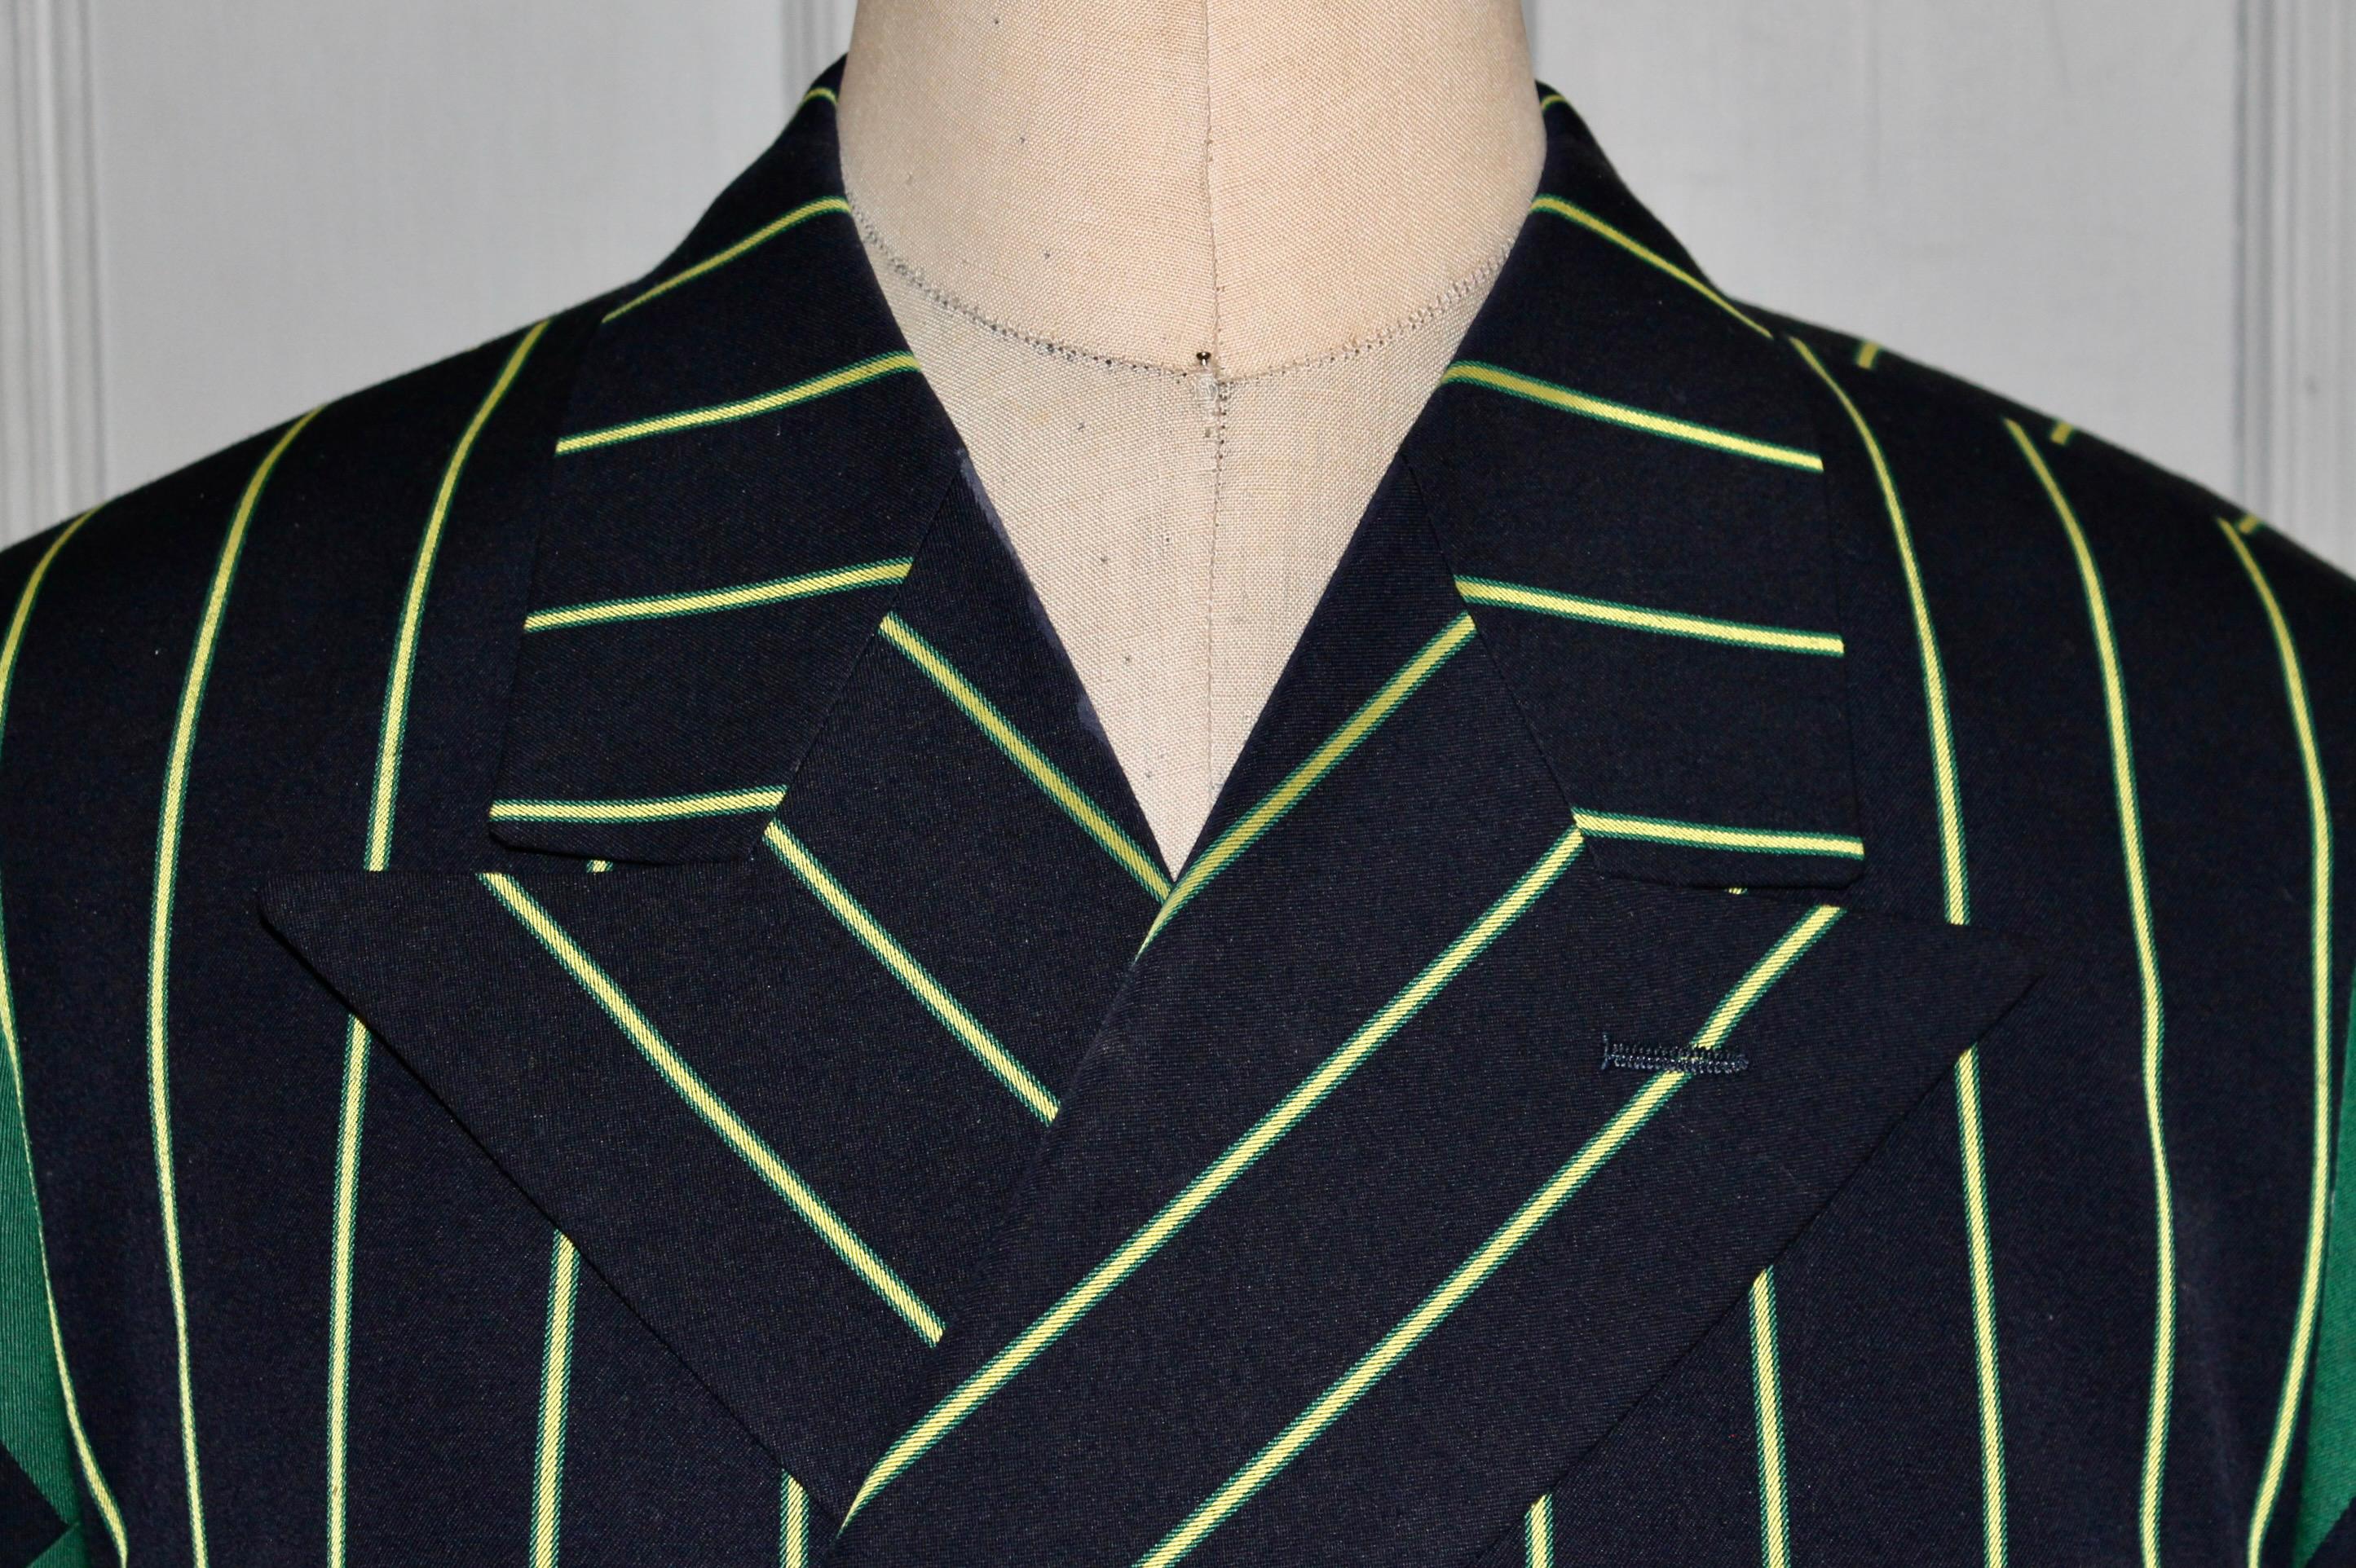 A classy and radical black yellow and green jacket.